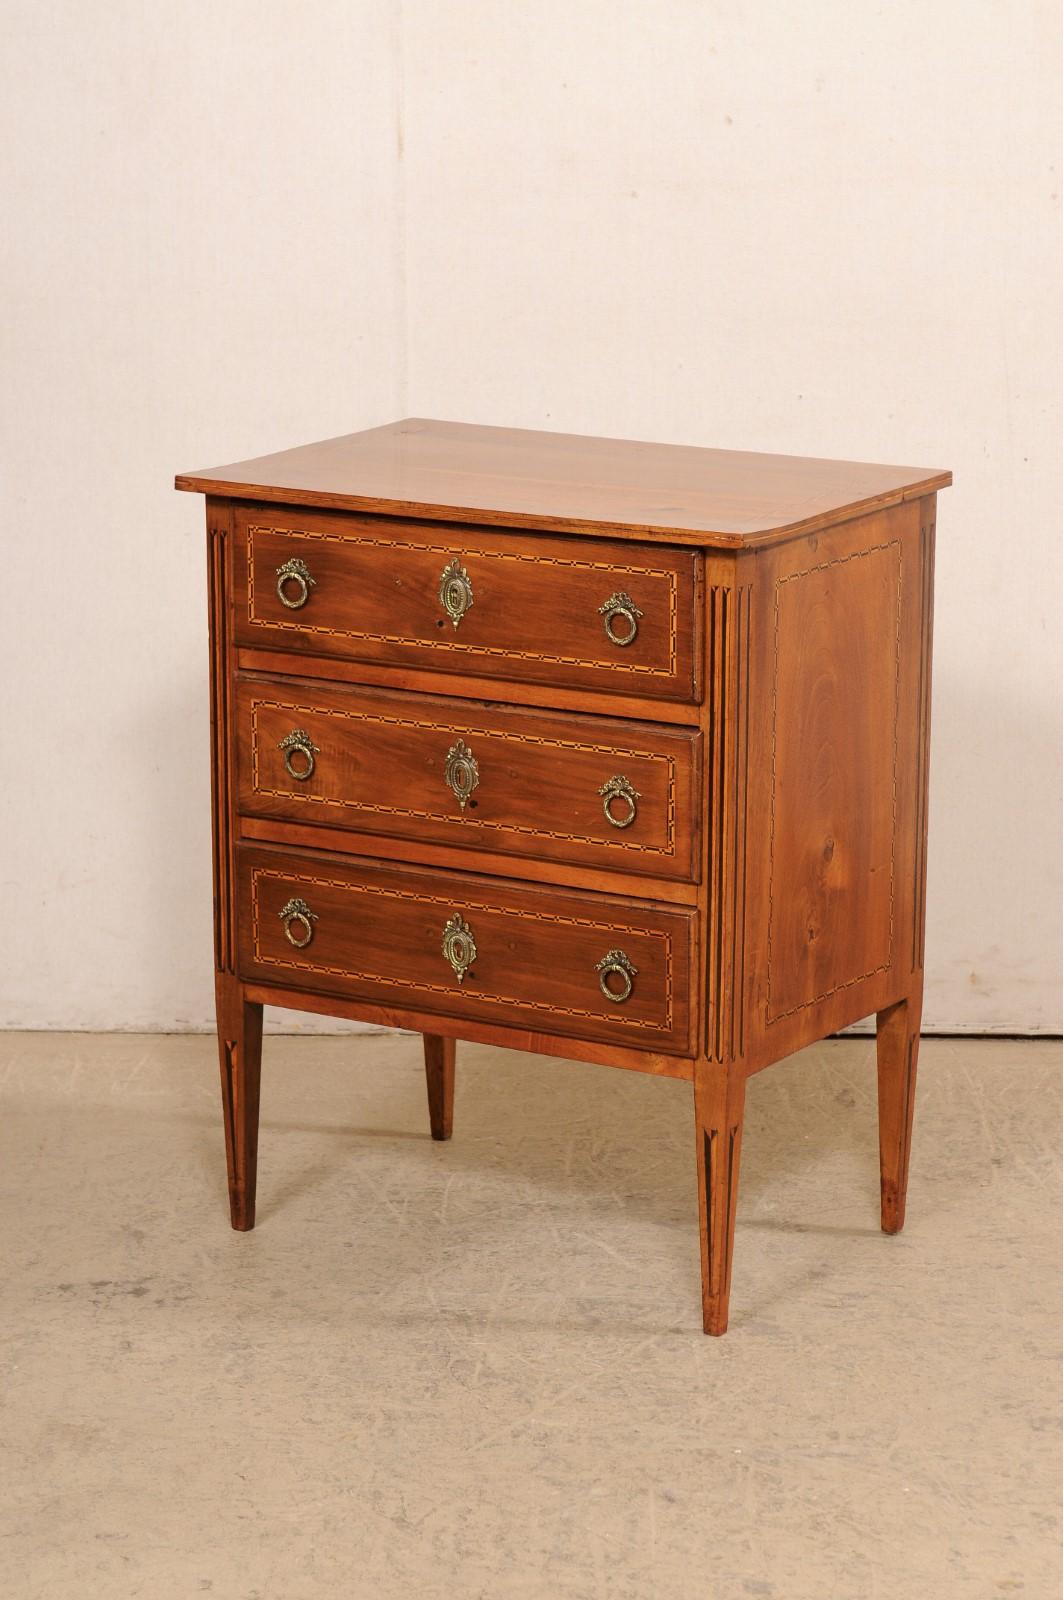 Italian Neoclassic-Style Raised Side Chest, Adorn w/Delicate Inlay Accents For Sale 3